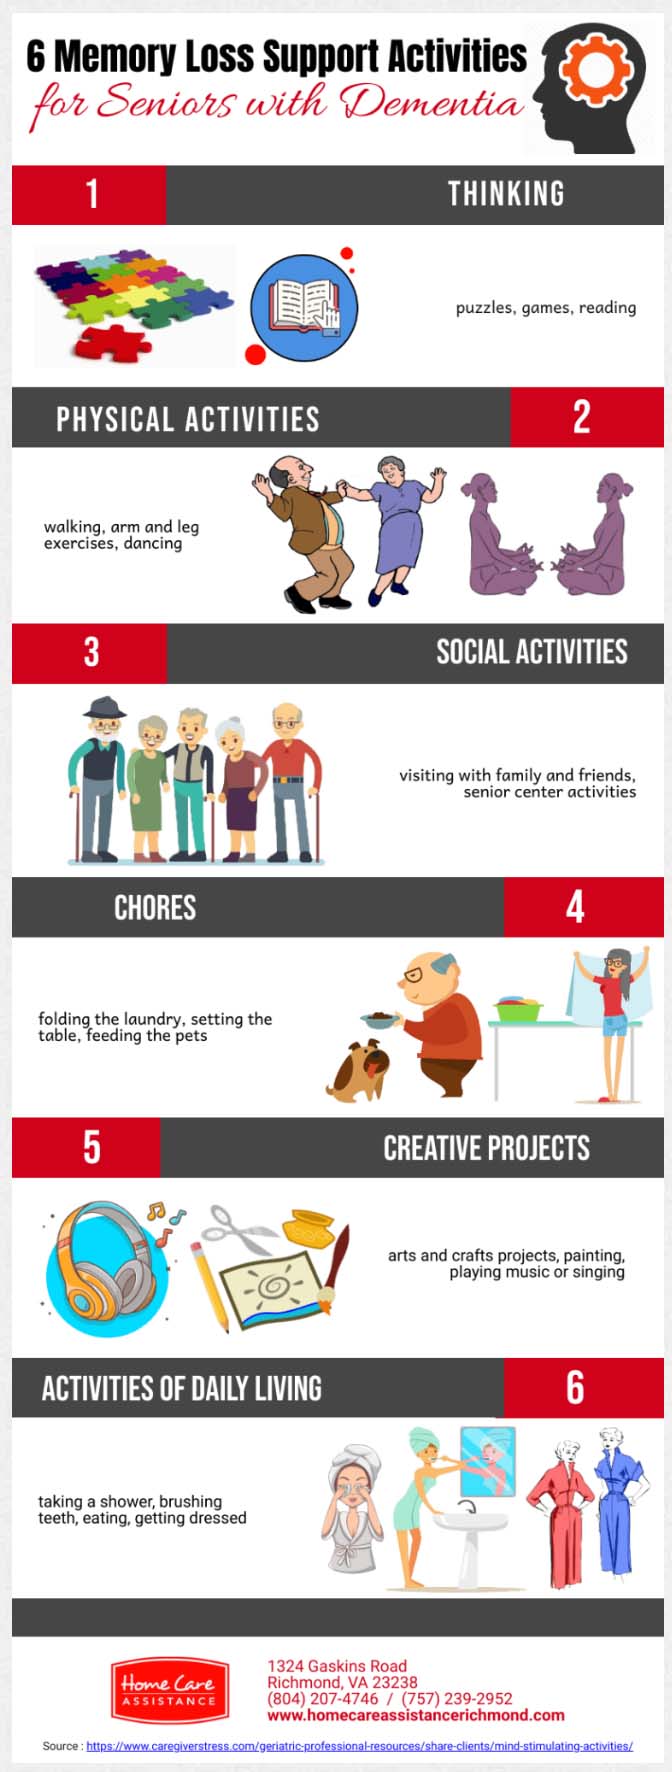 Memory Loss Support Activities for Seniors with Dementia